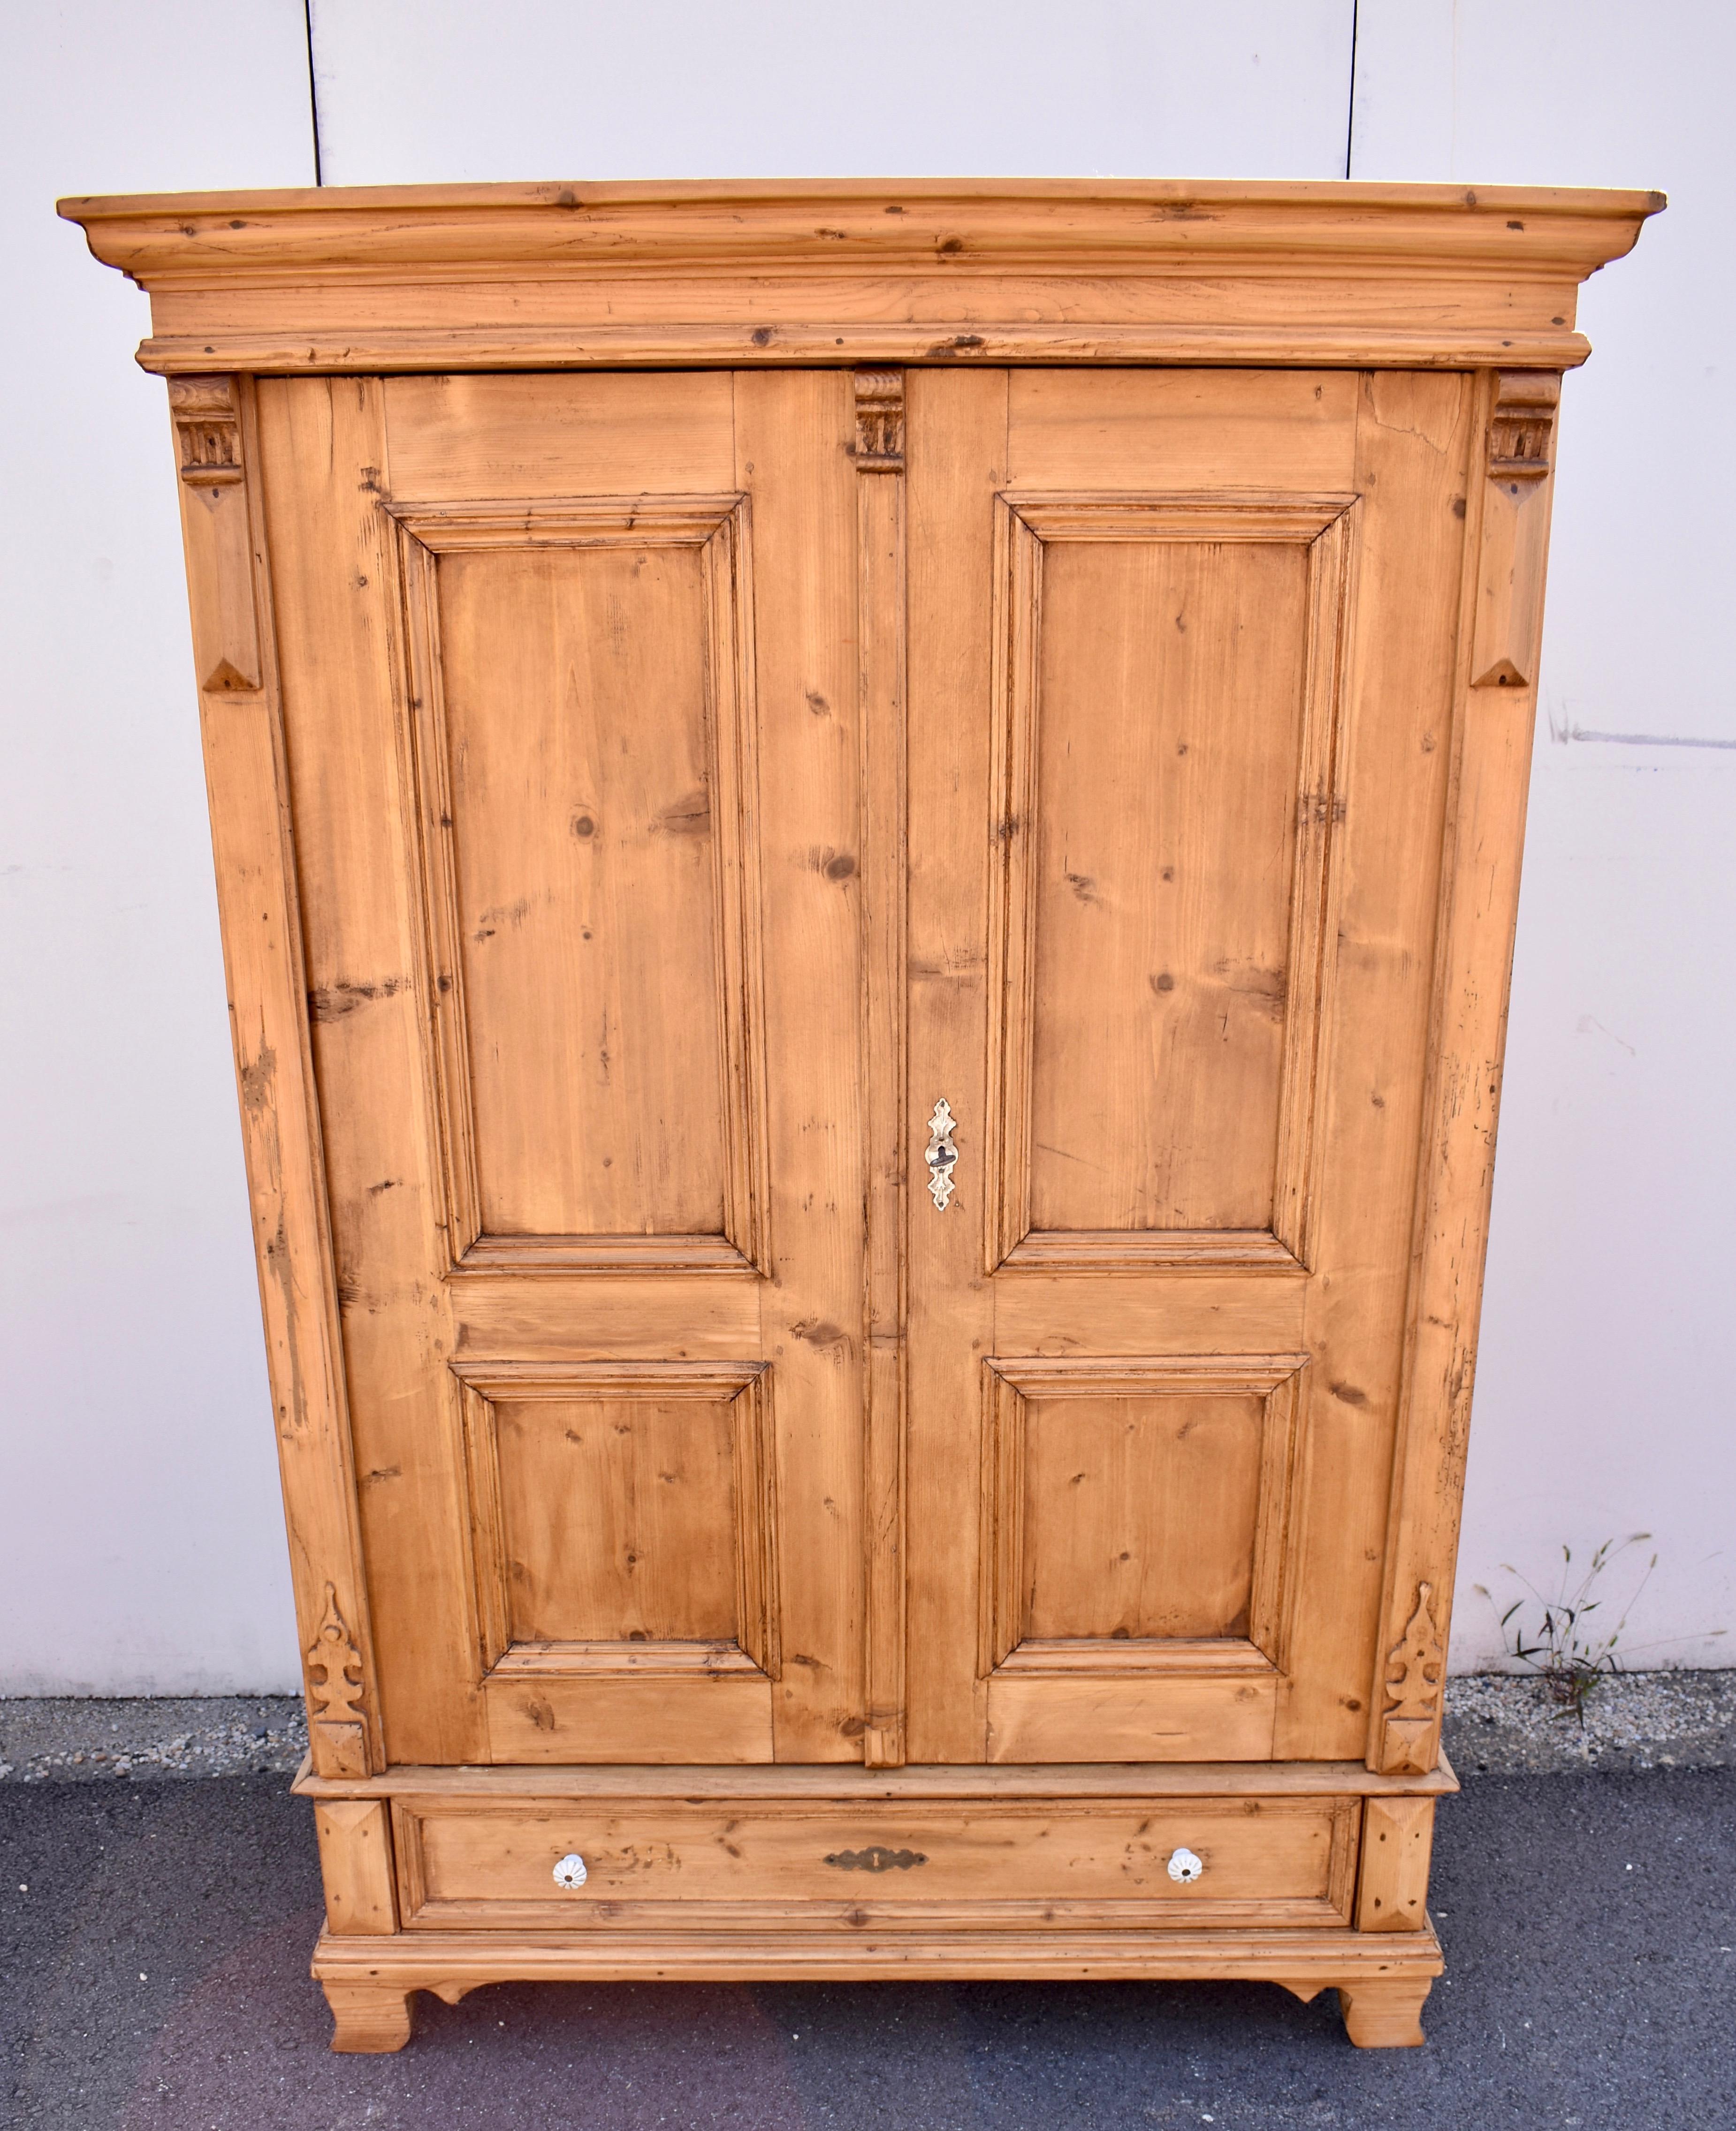 The bold ogee crown molding incorporates a horizontal reeded strip and sits on a plain frieze on this sturdy armoire.  The door frames are thick, and enclose two flat panels on each door.  The front corners  are dressed with carved hardwood corbels